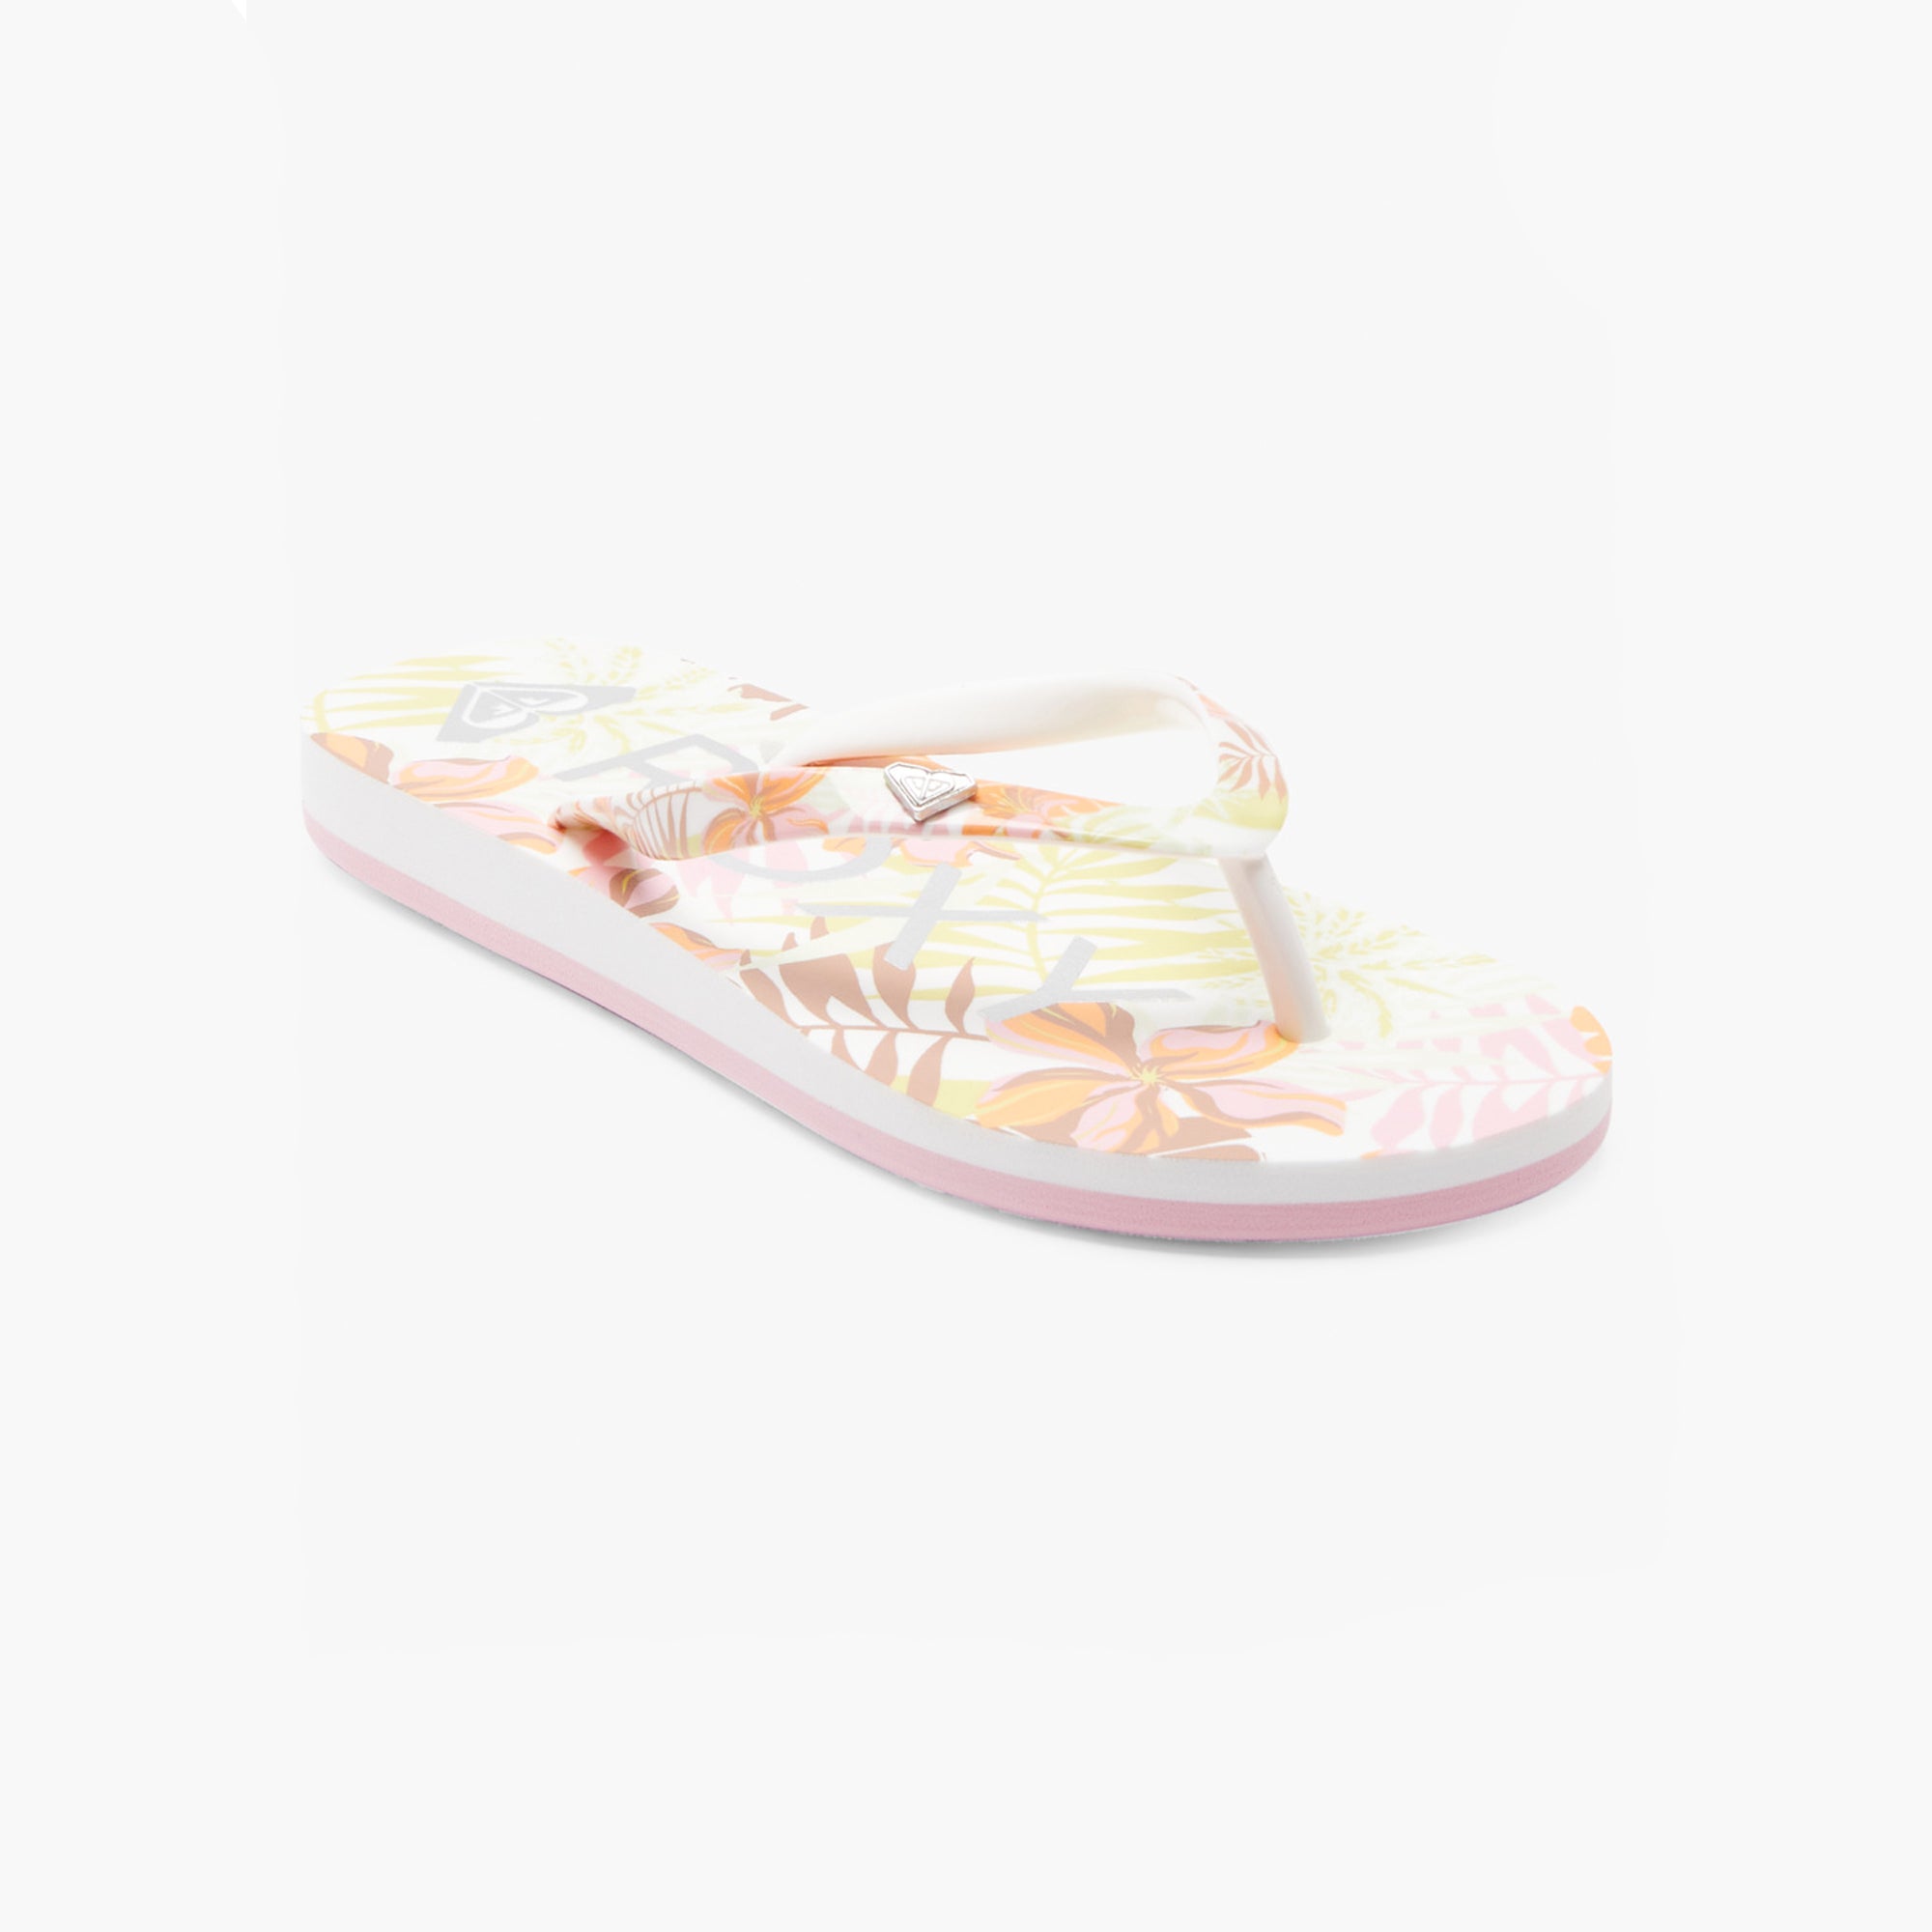 Roxy Pebbles Youth Girl's Sandals